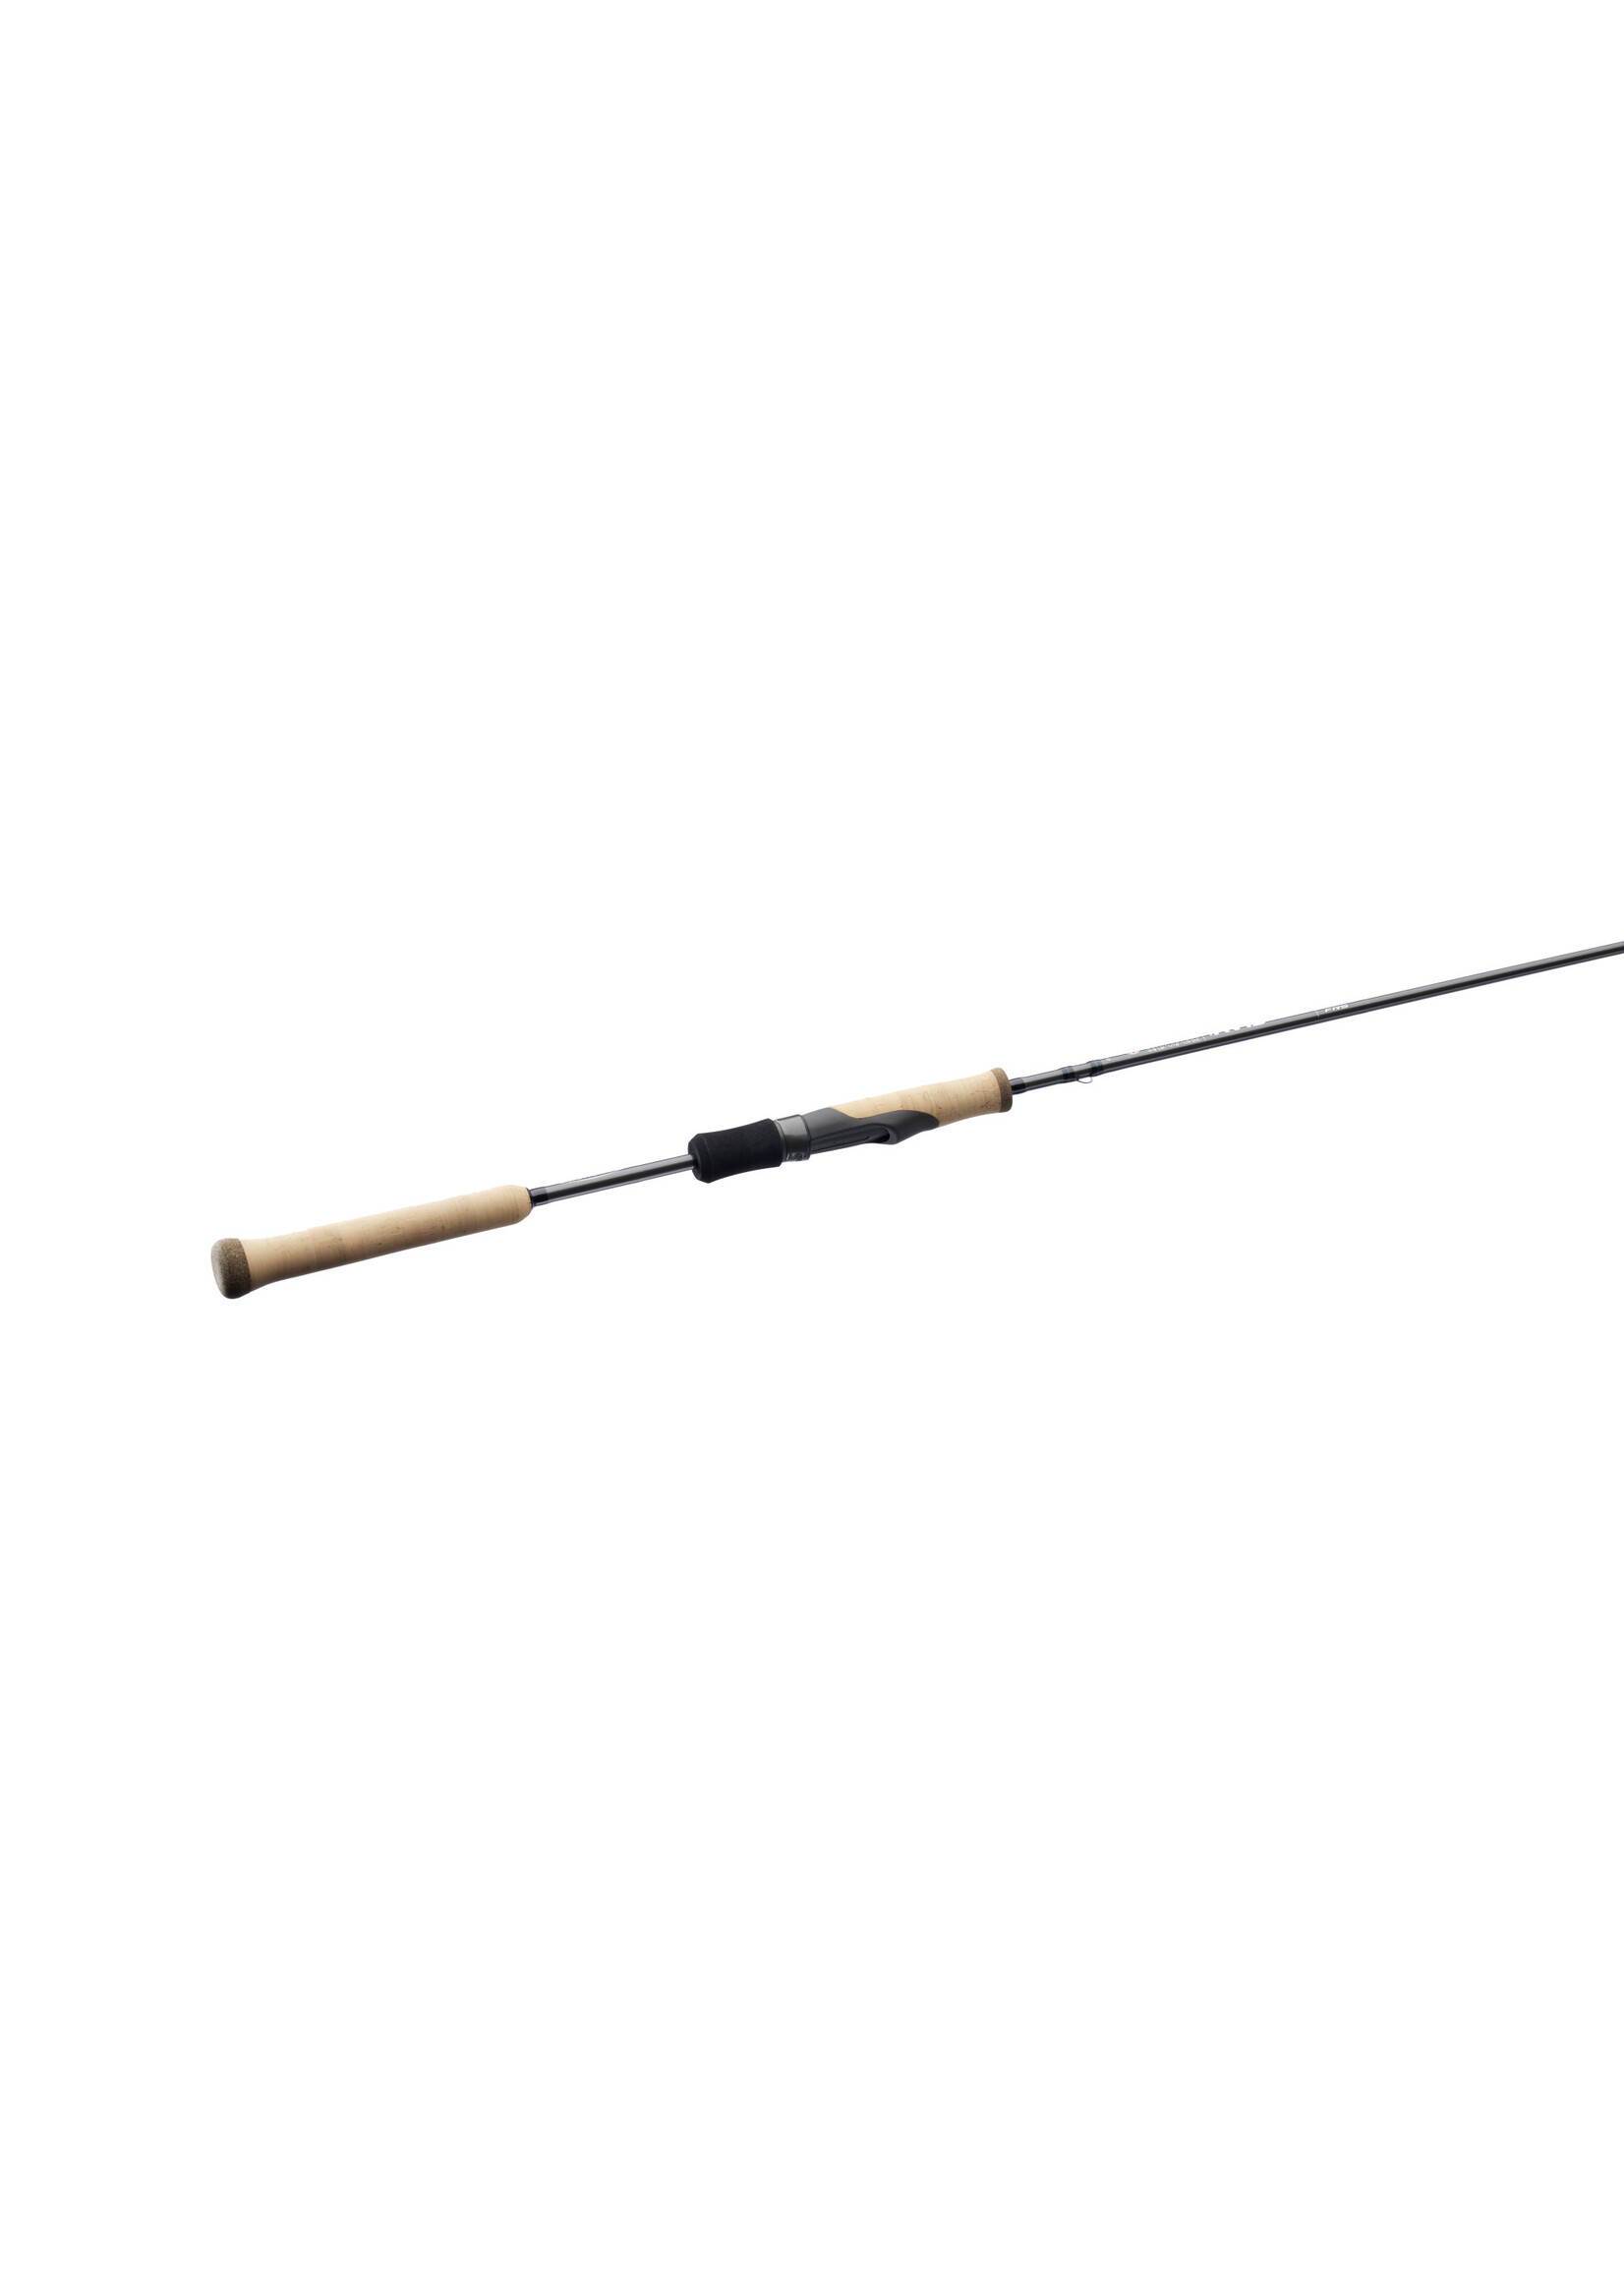 St. Croix St. Croix Trout Series Spinning Rods